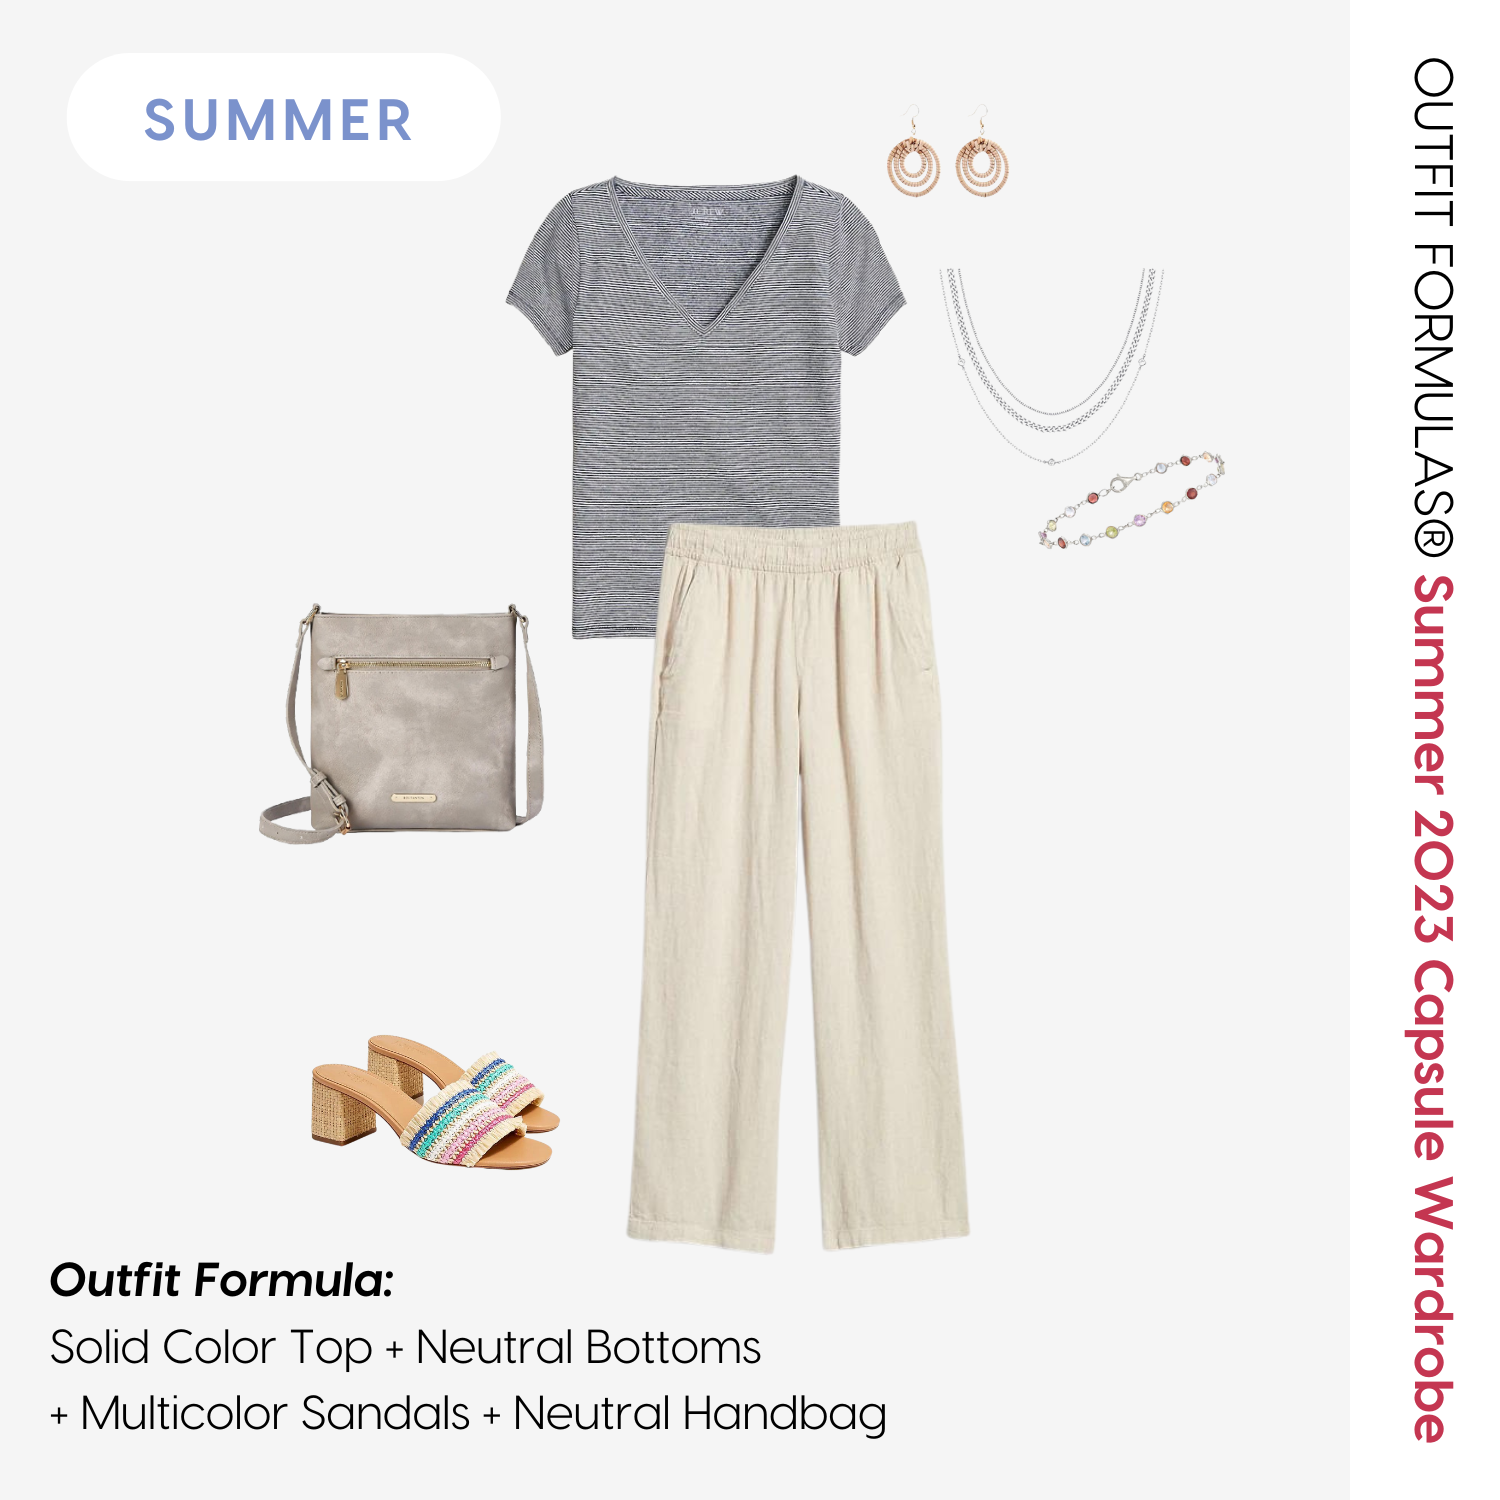 How to dress to color seasons - Summer color season